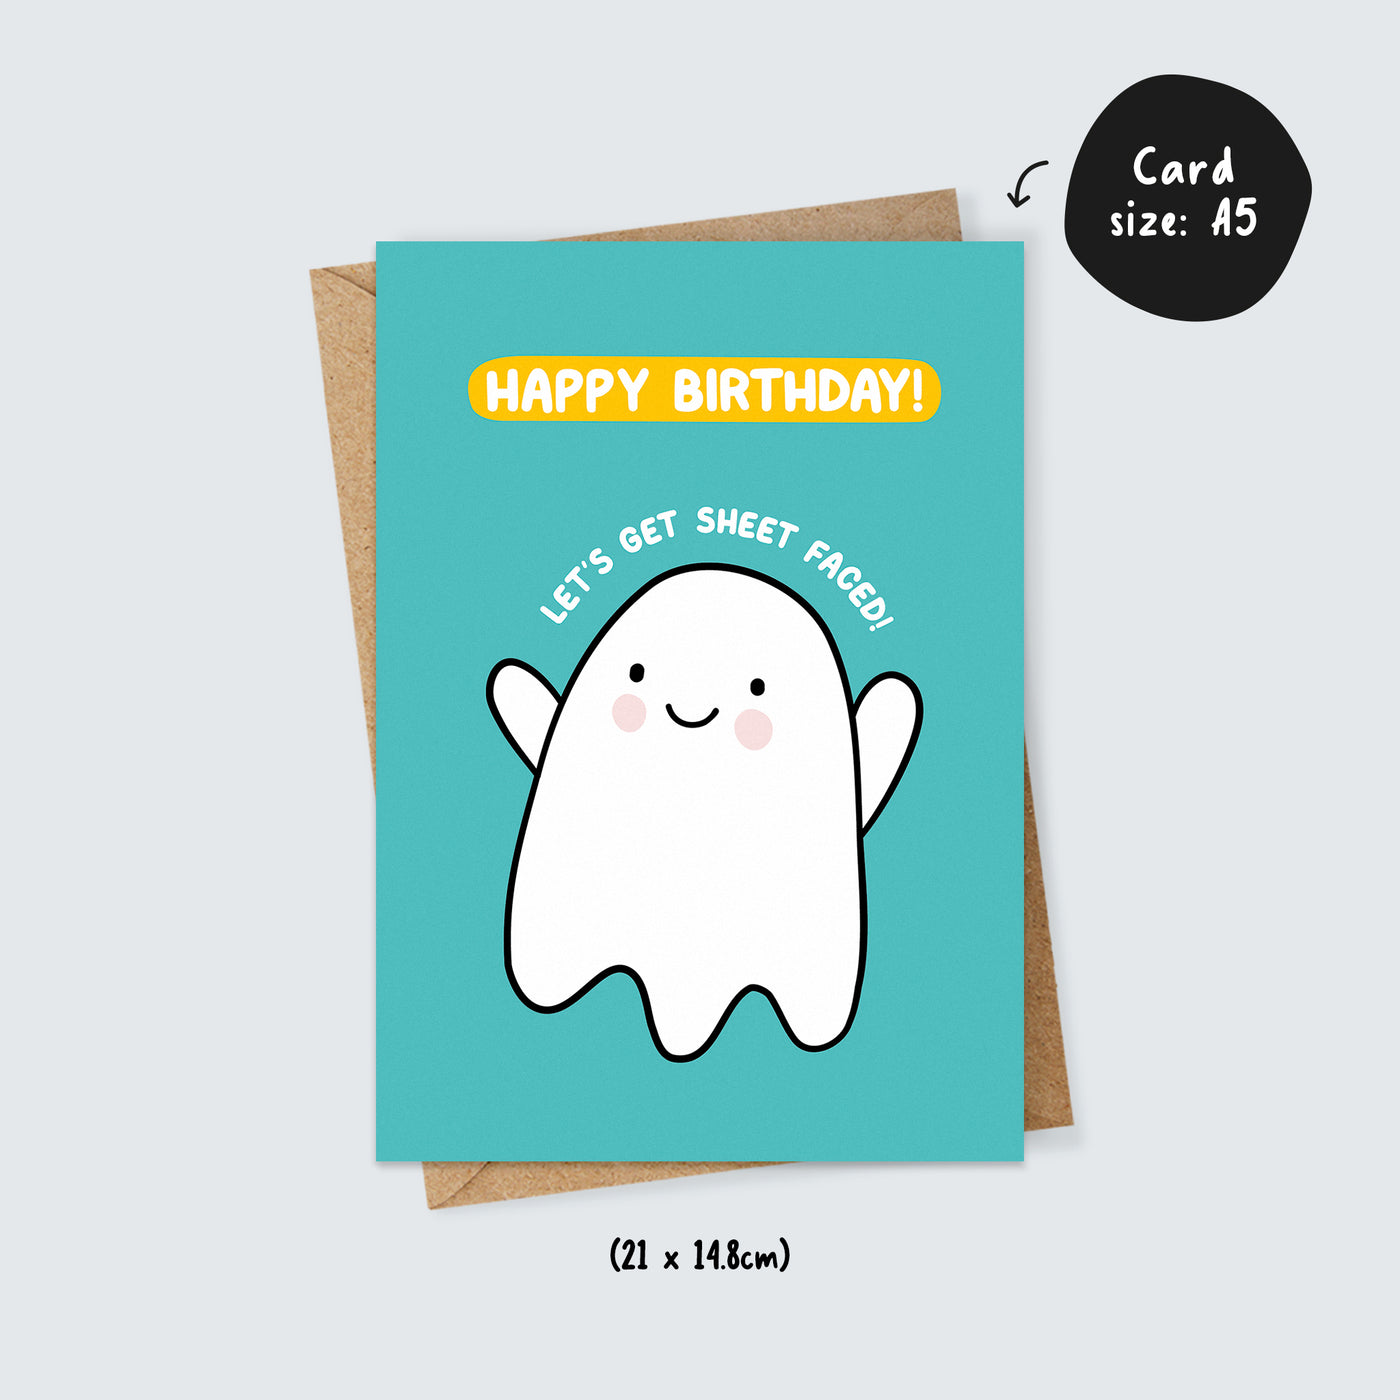 Let's Get Sheet Faced Cute Ghost Card